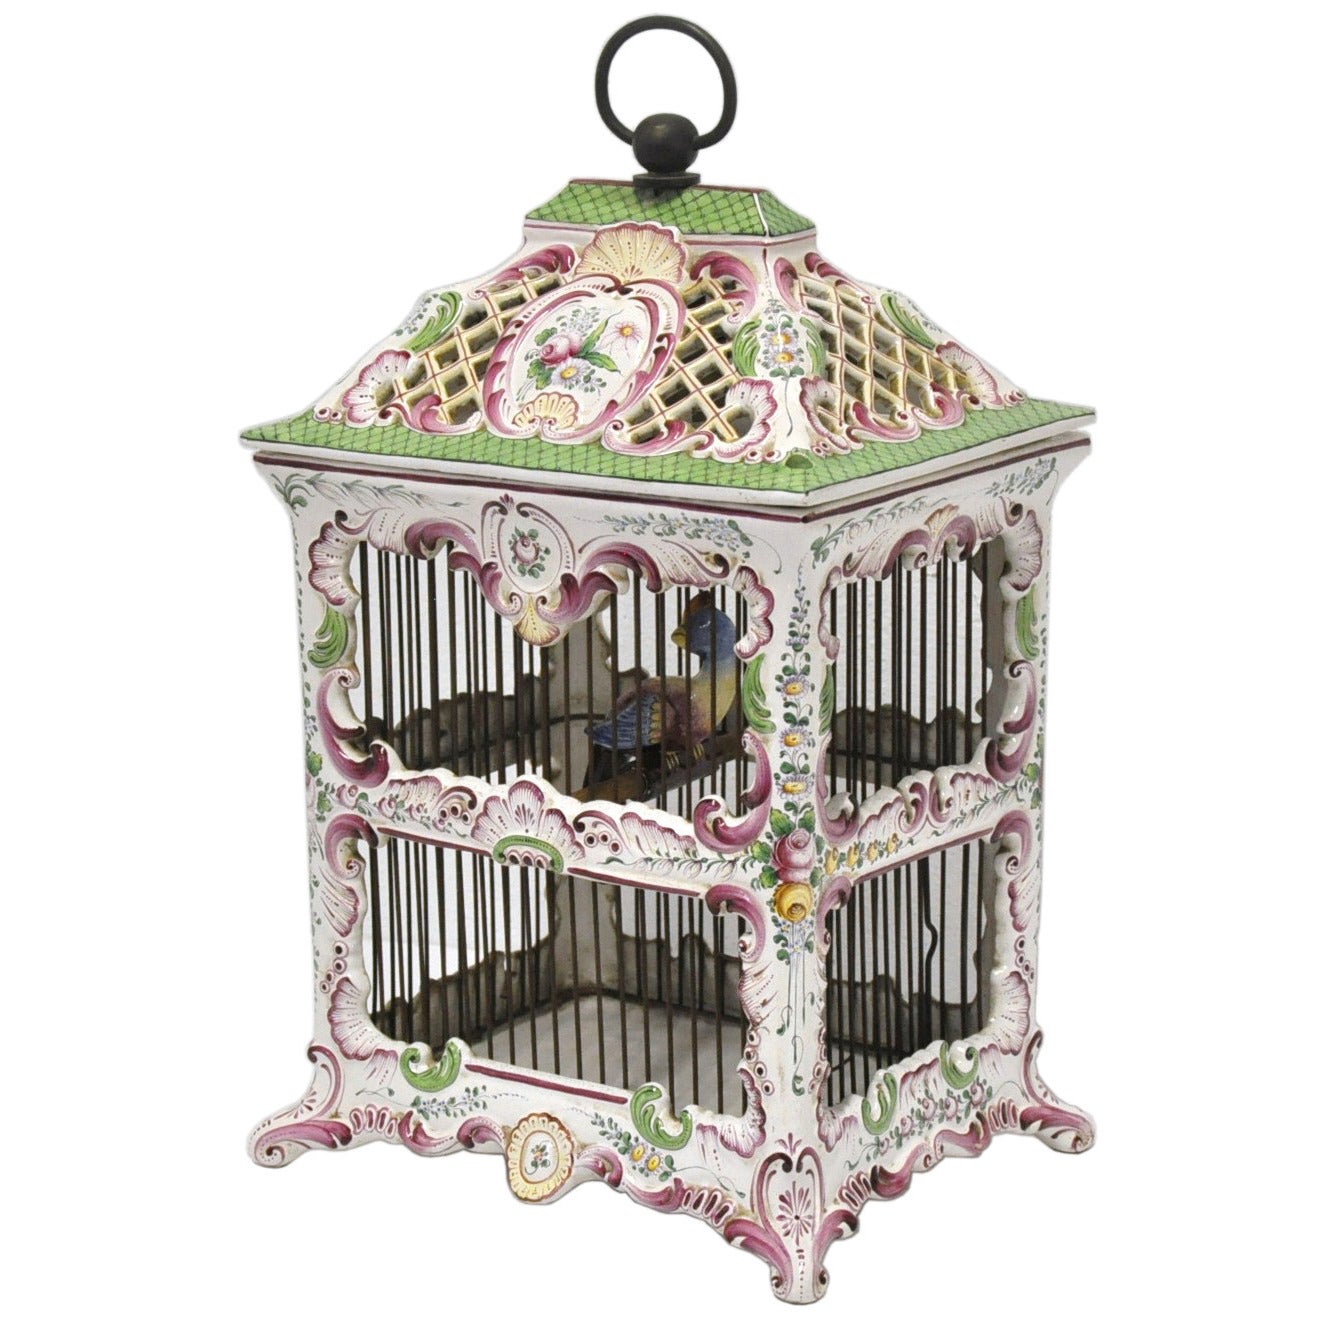 19th Century, French, Hand-Painted Porcelain Birdcage Lamp from Paris